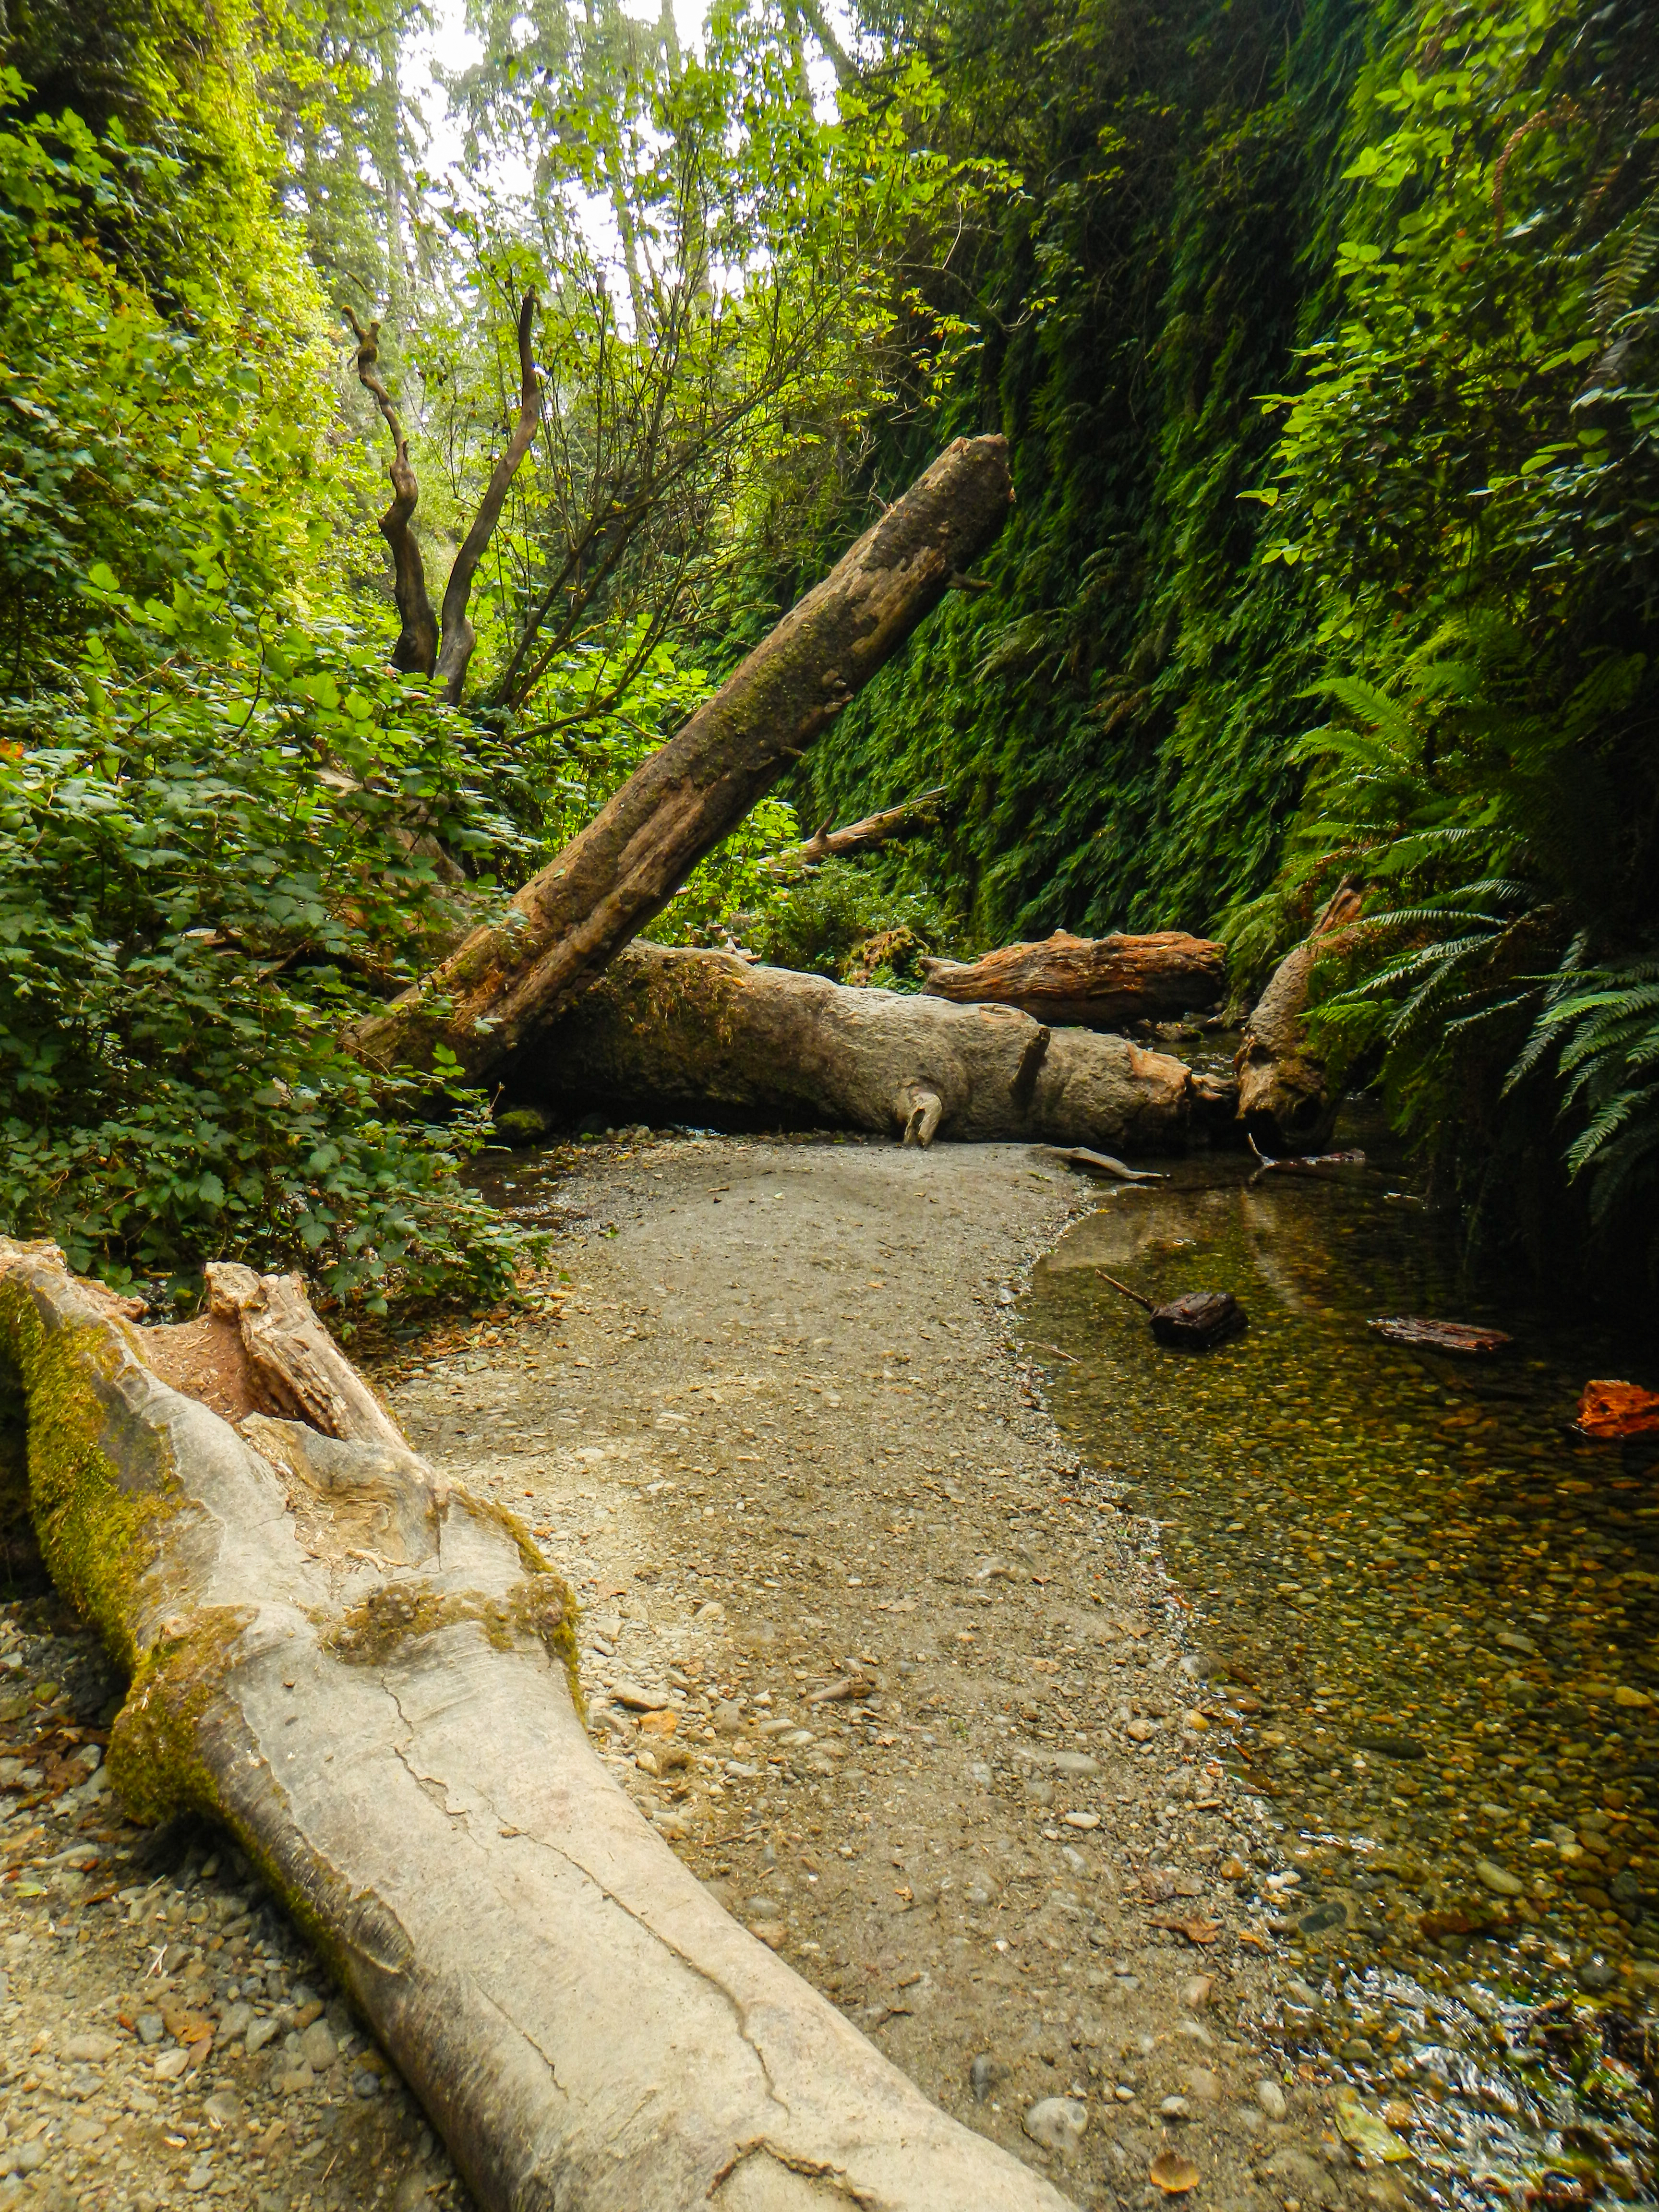 A creekbed in a redwood forest with large trunks of fallen trees strewn into the distance.